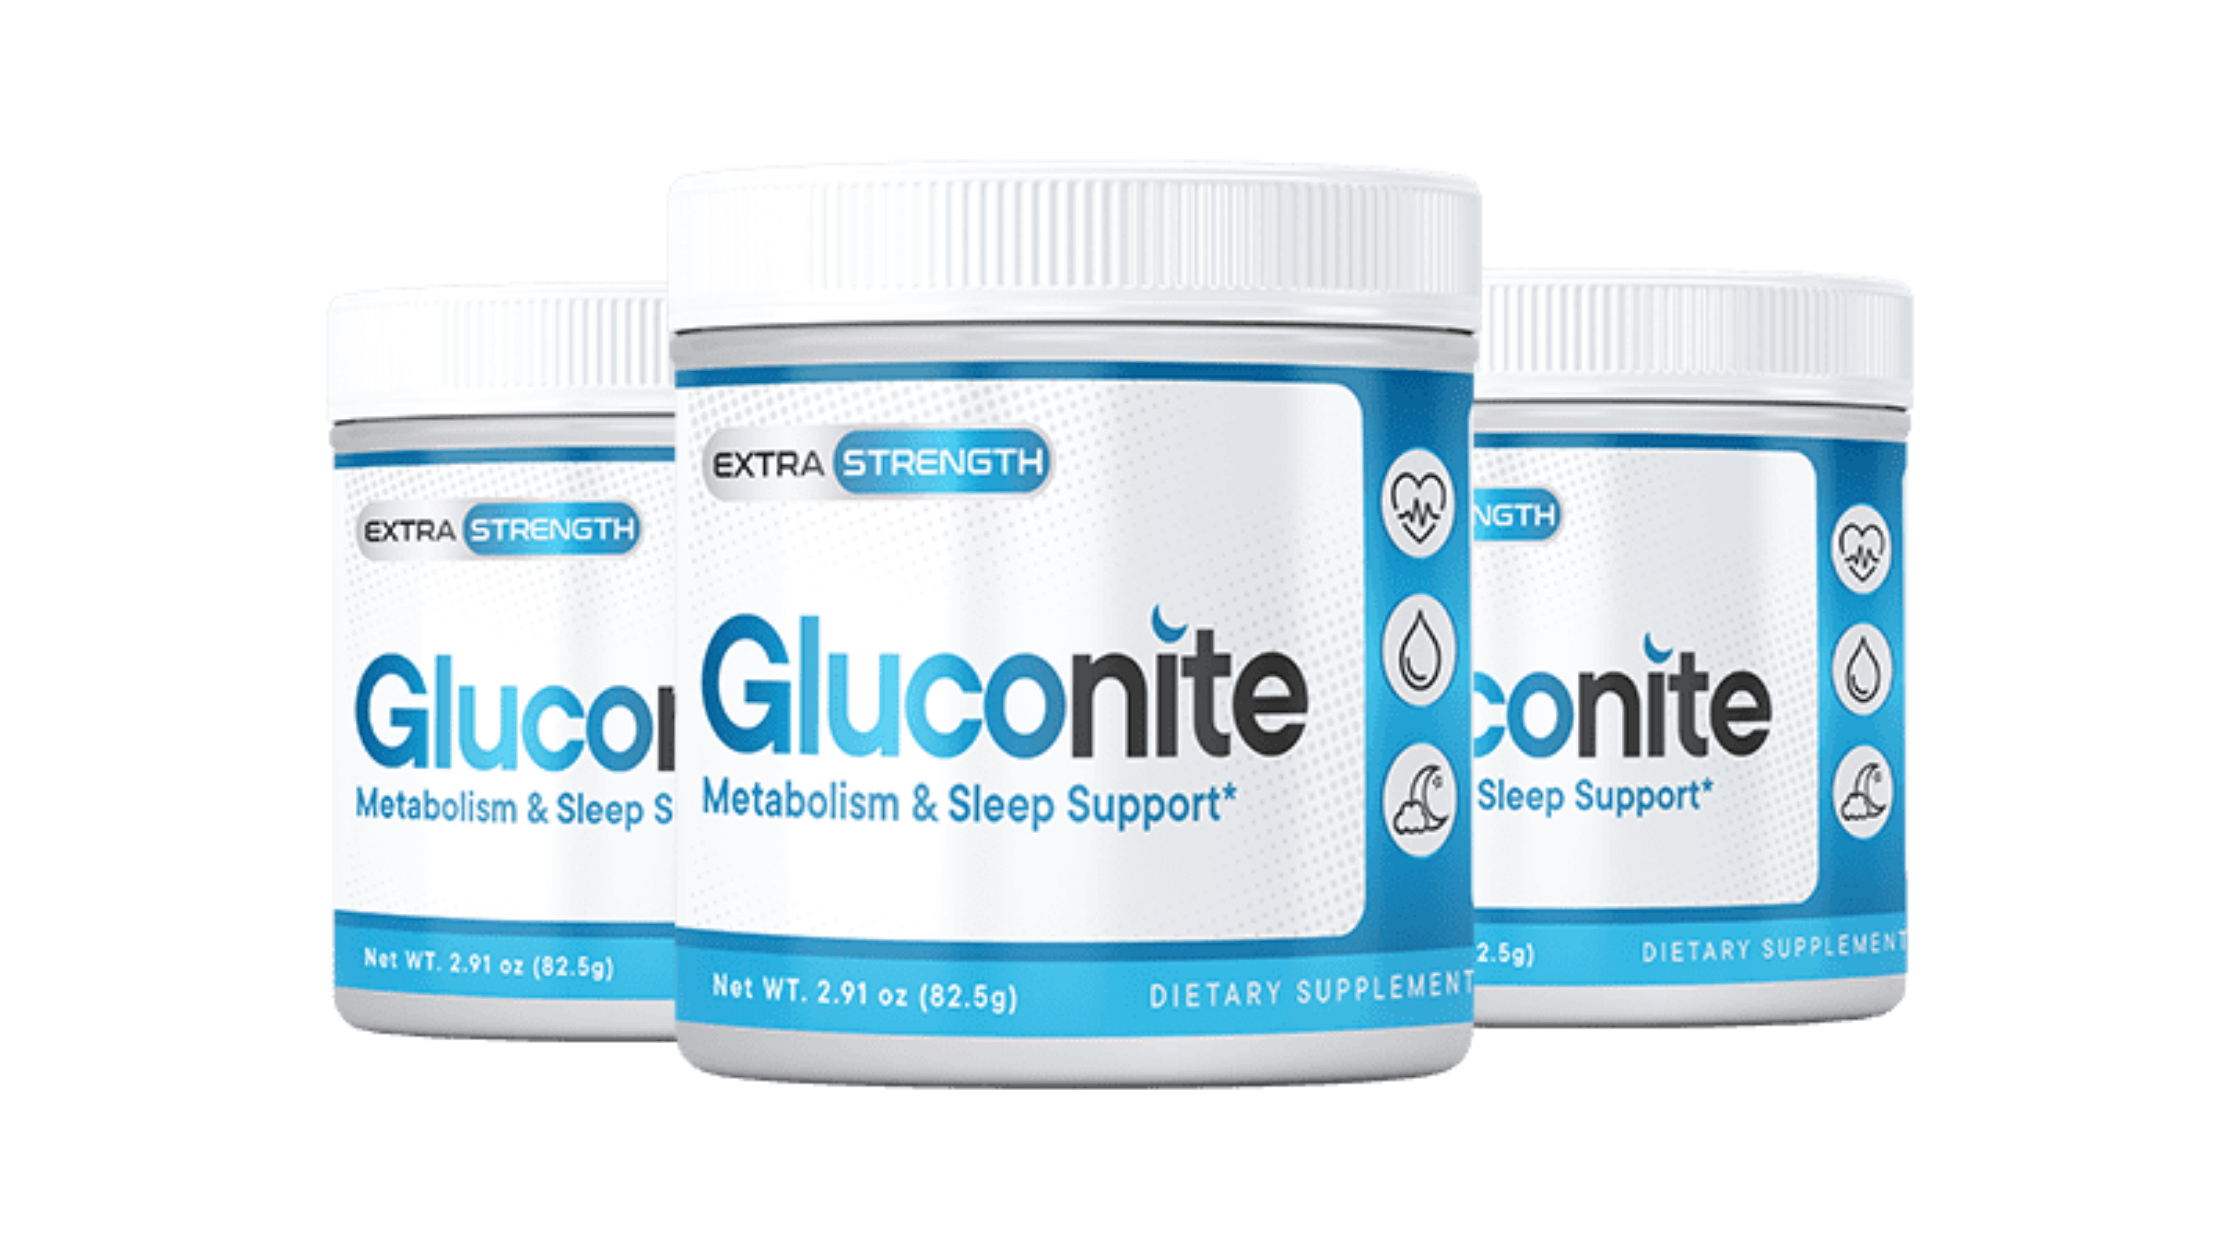 Gluconite metabolism and sleep support